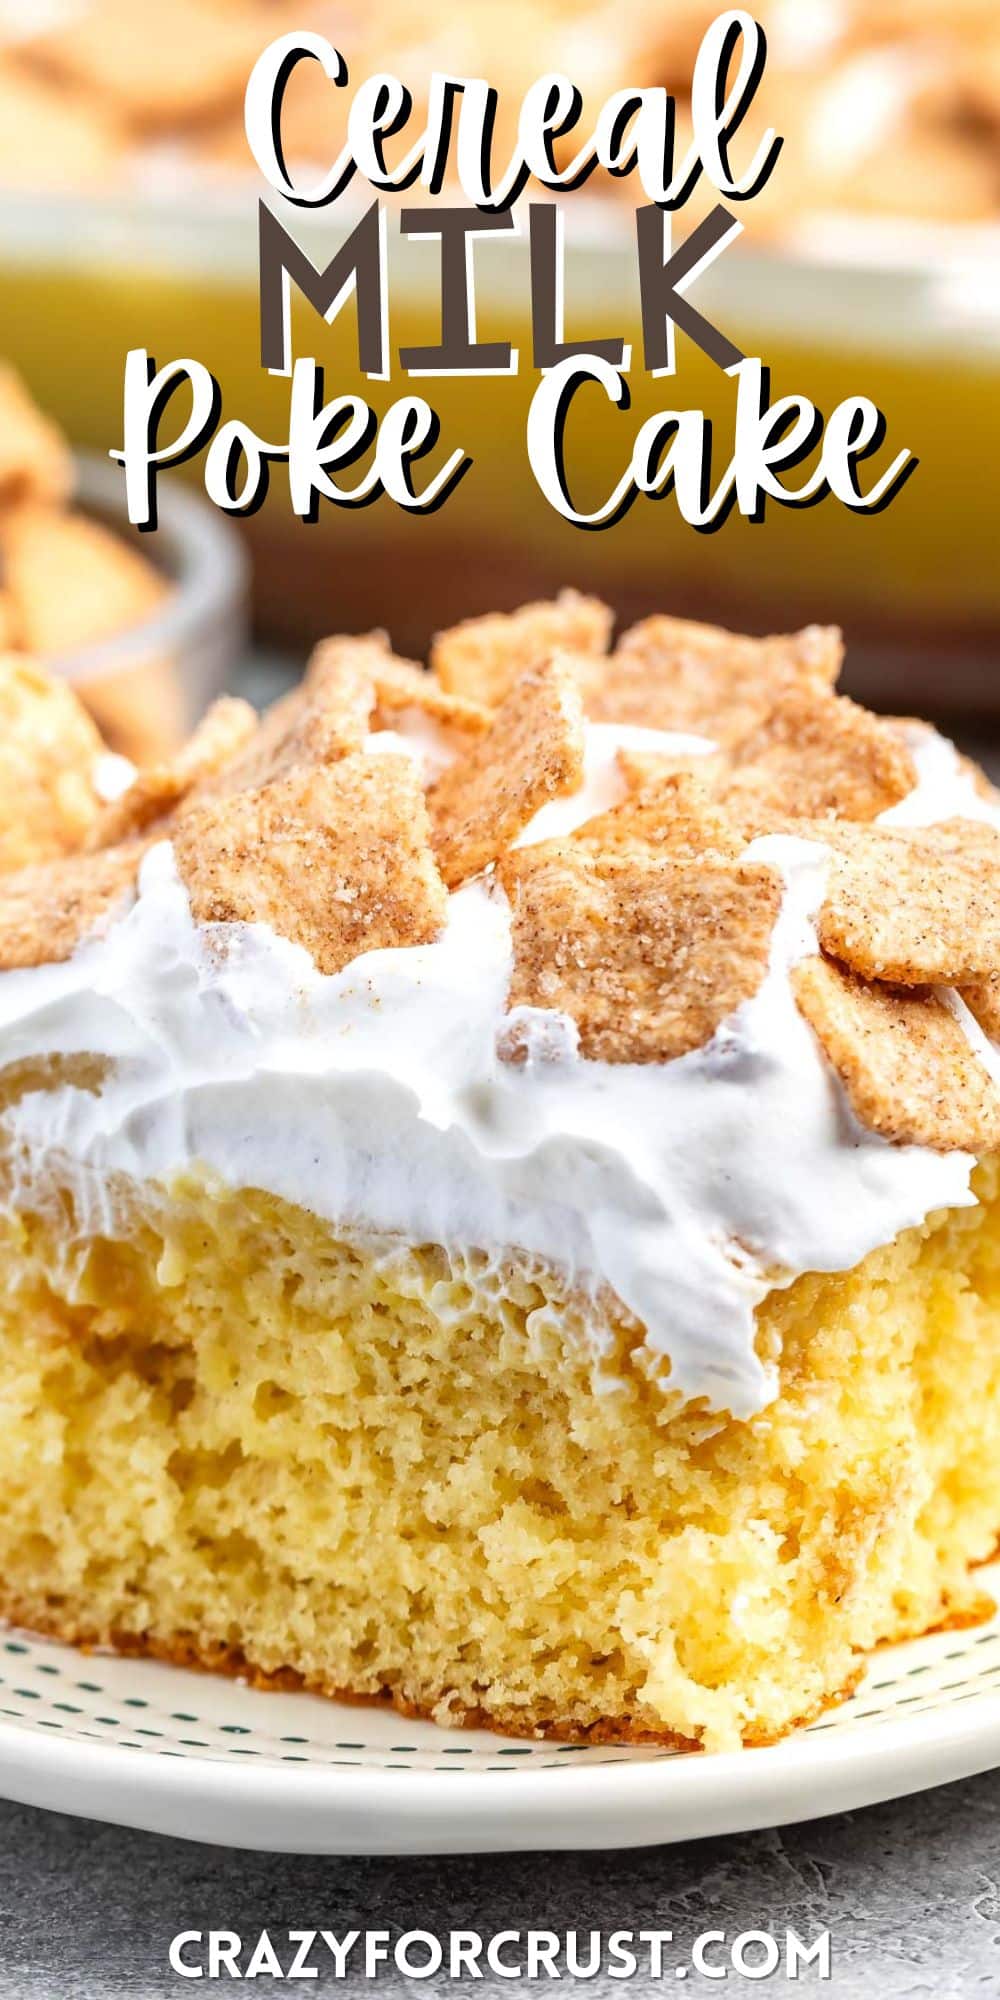 cake with white frosting and cinnamon toast crunch on top with words on the image.